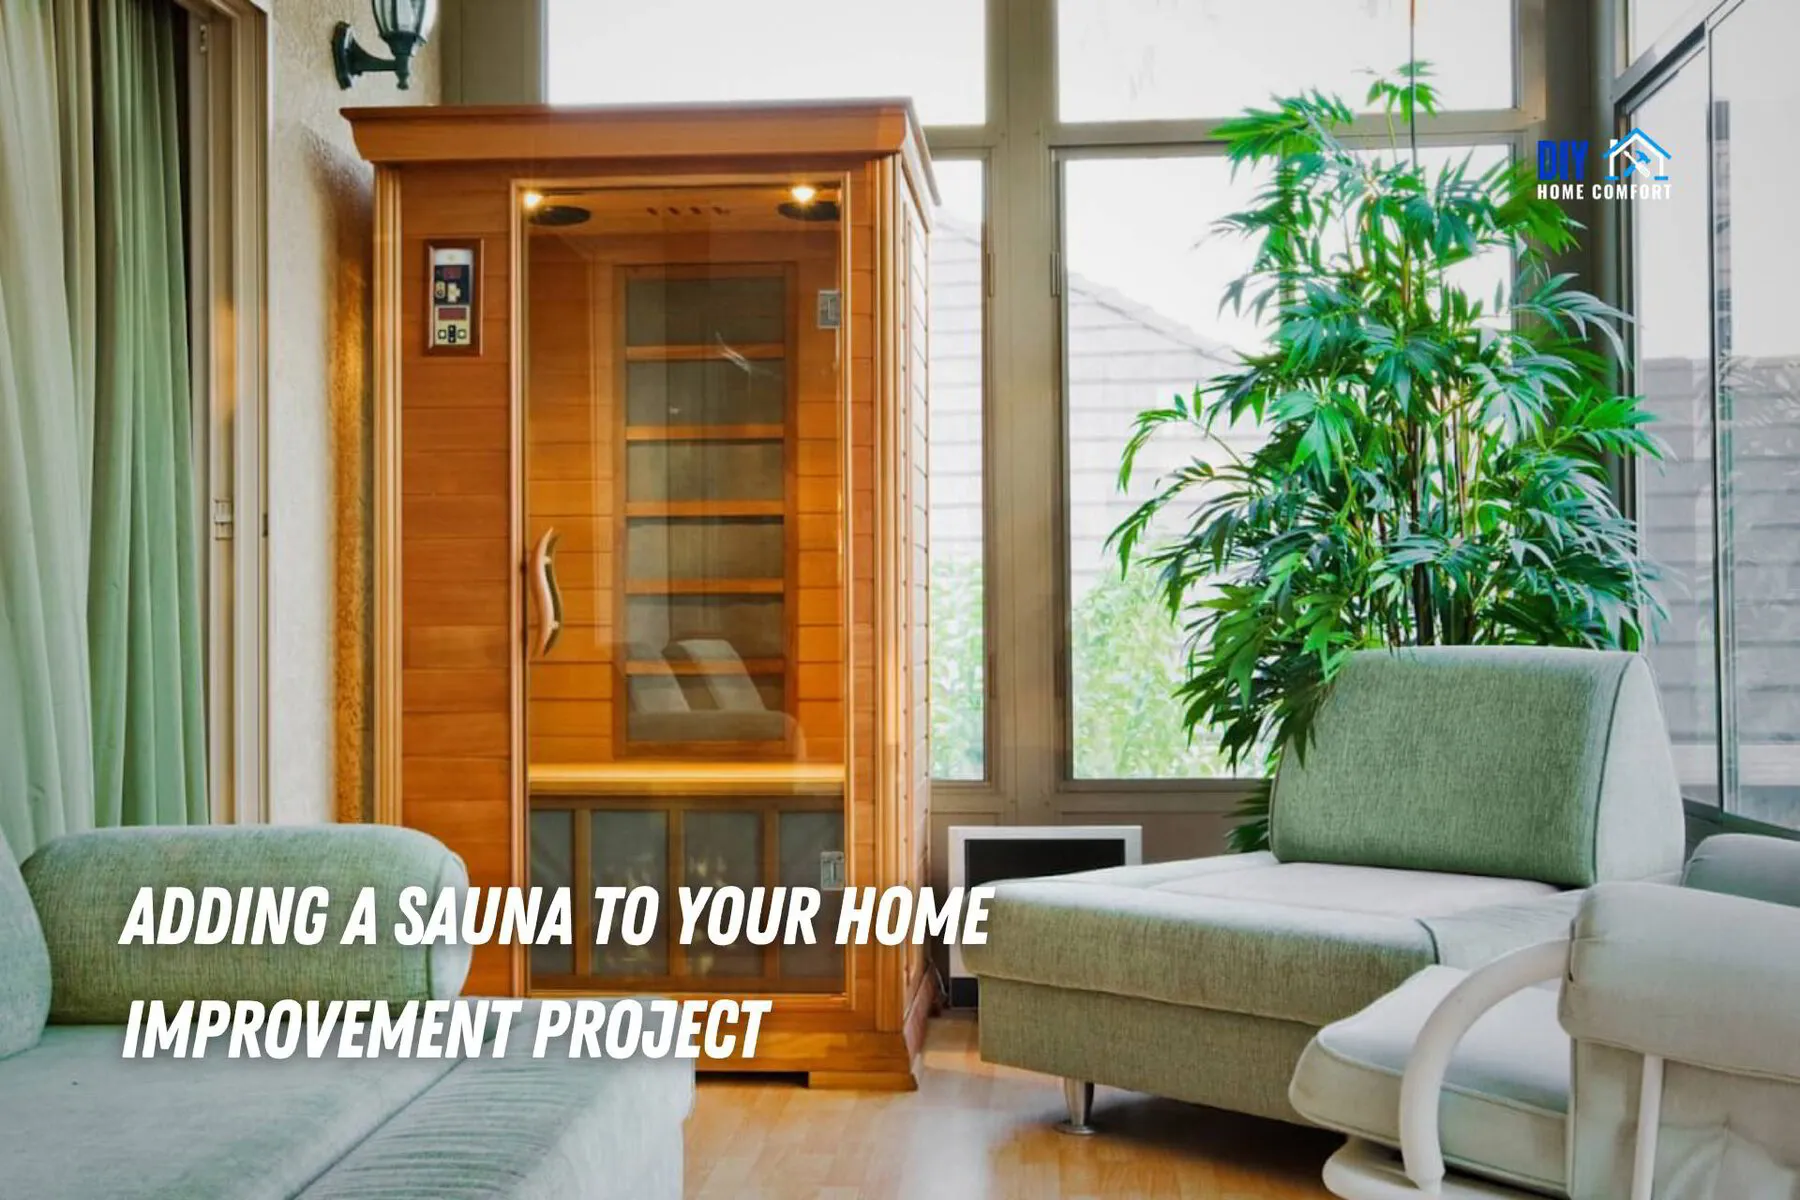 Renovating with Wellness in Mind: Adding a Sauna to Your Home Improvement Project | DIY Home Comfort